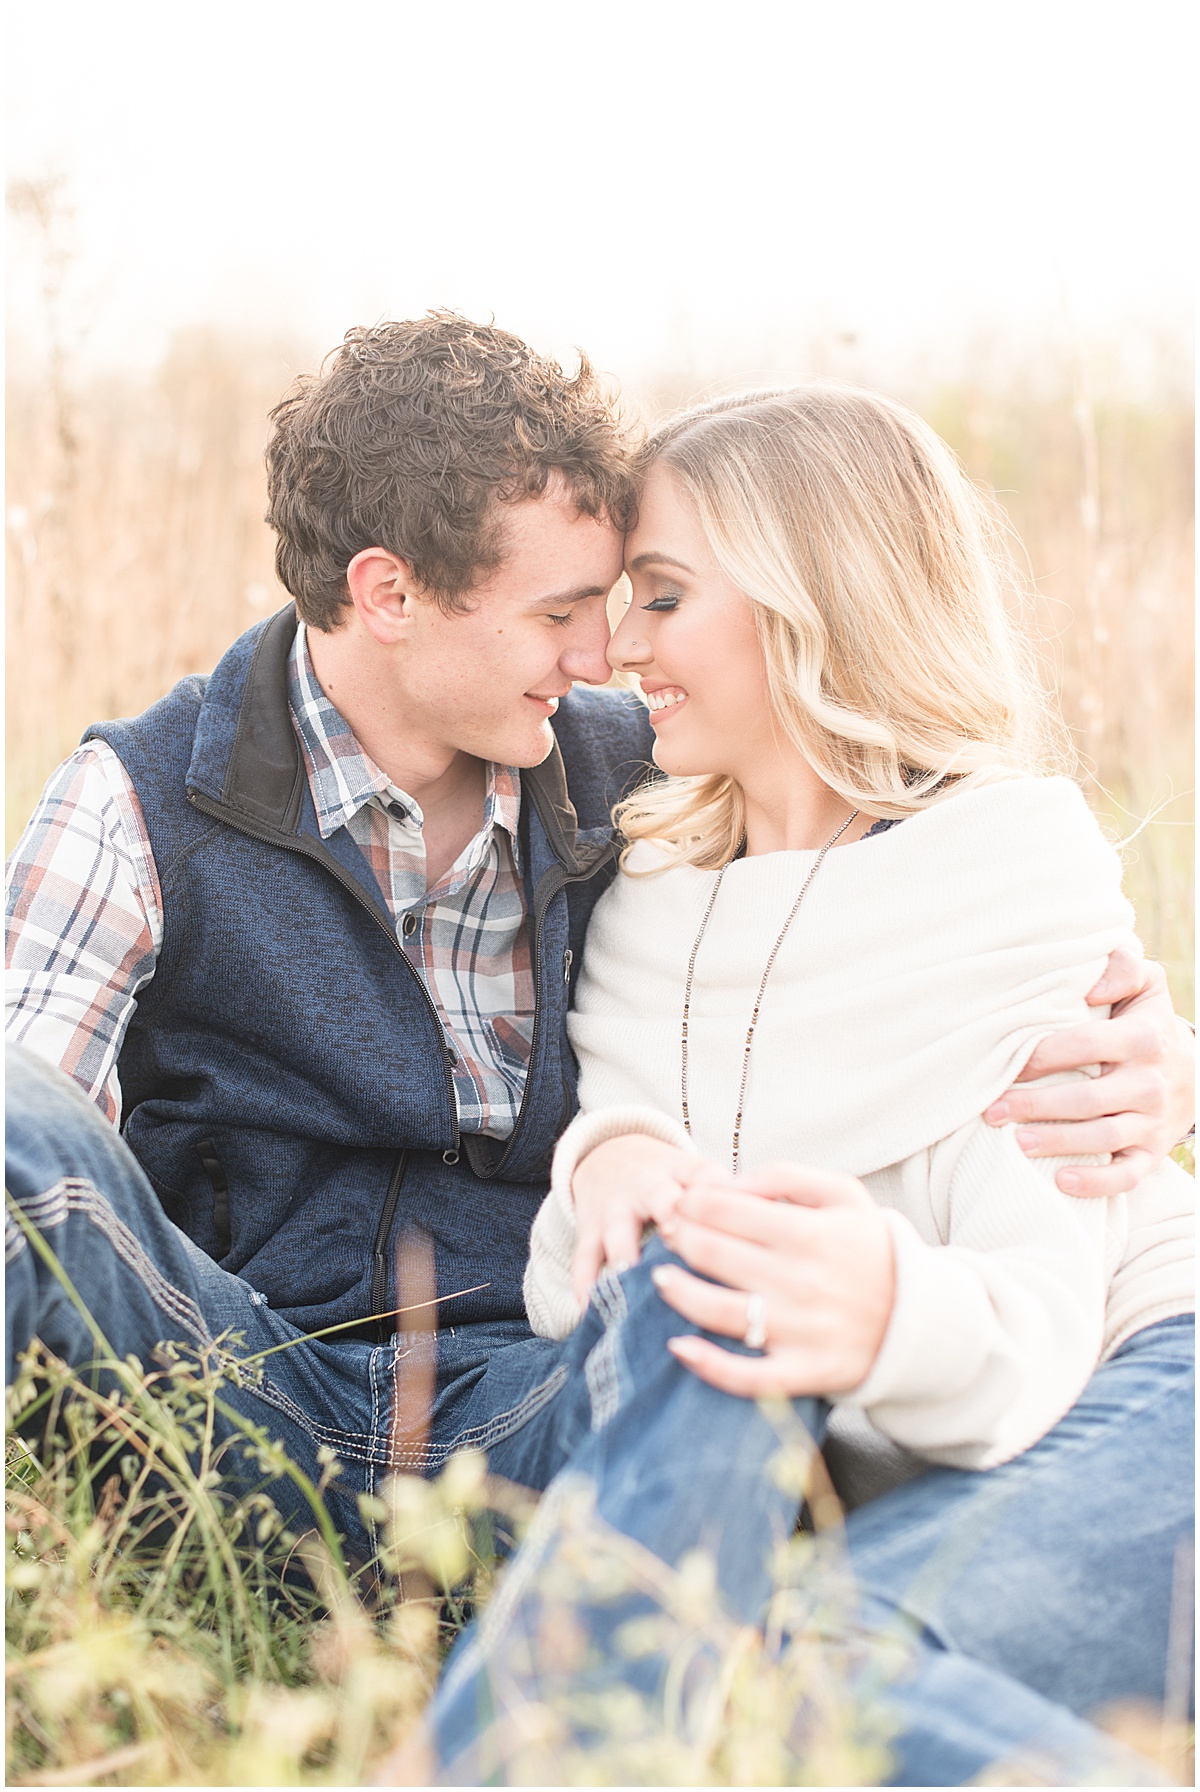 Wyatt Willson and Kaelyn Shircliff engagement session at Fairfield Lakes Park in Lafayette Indiana 23.jpg